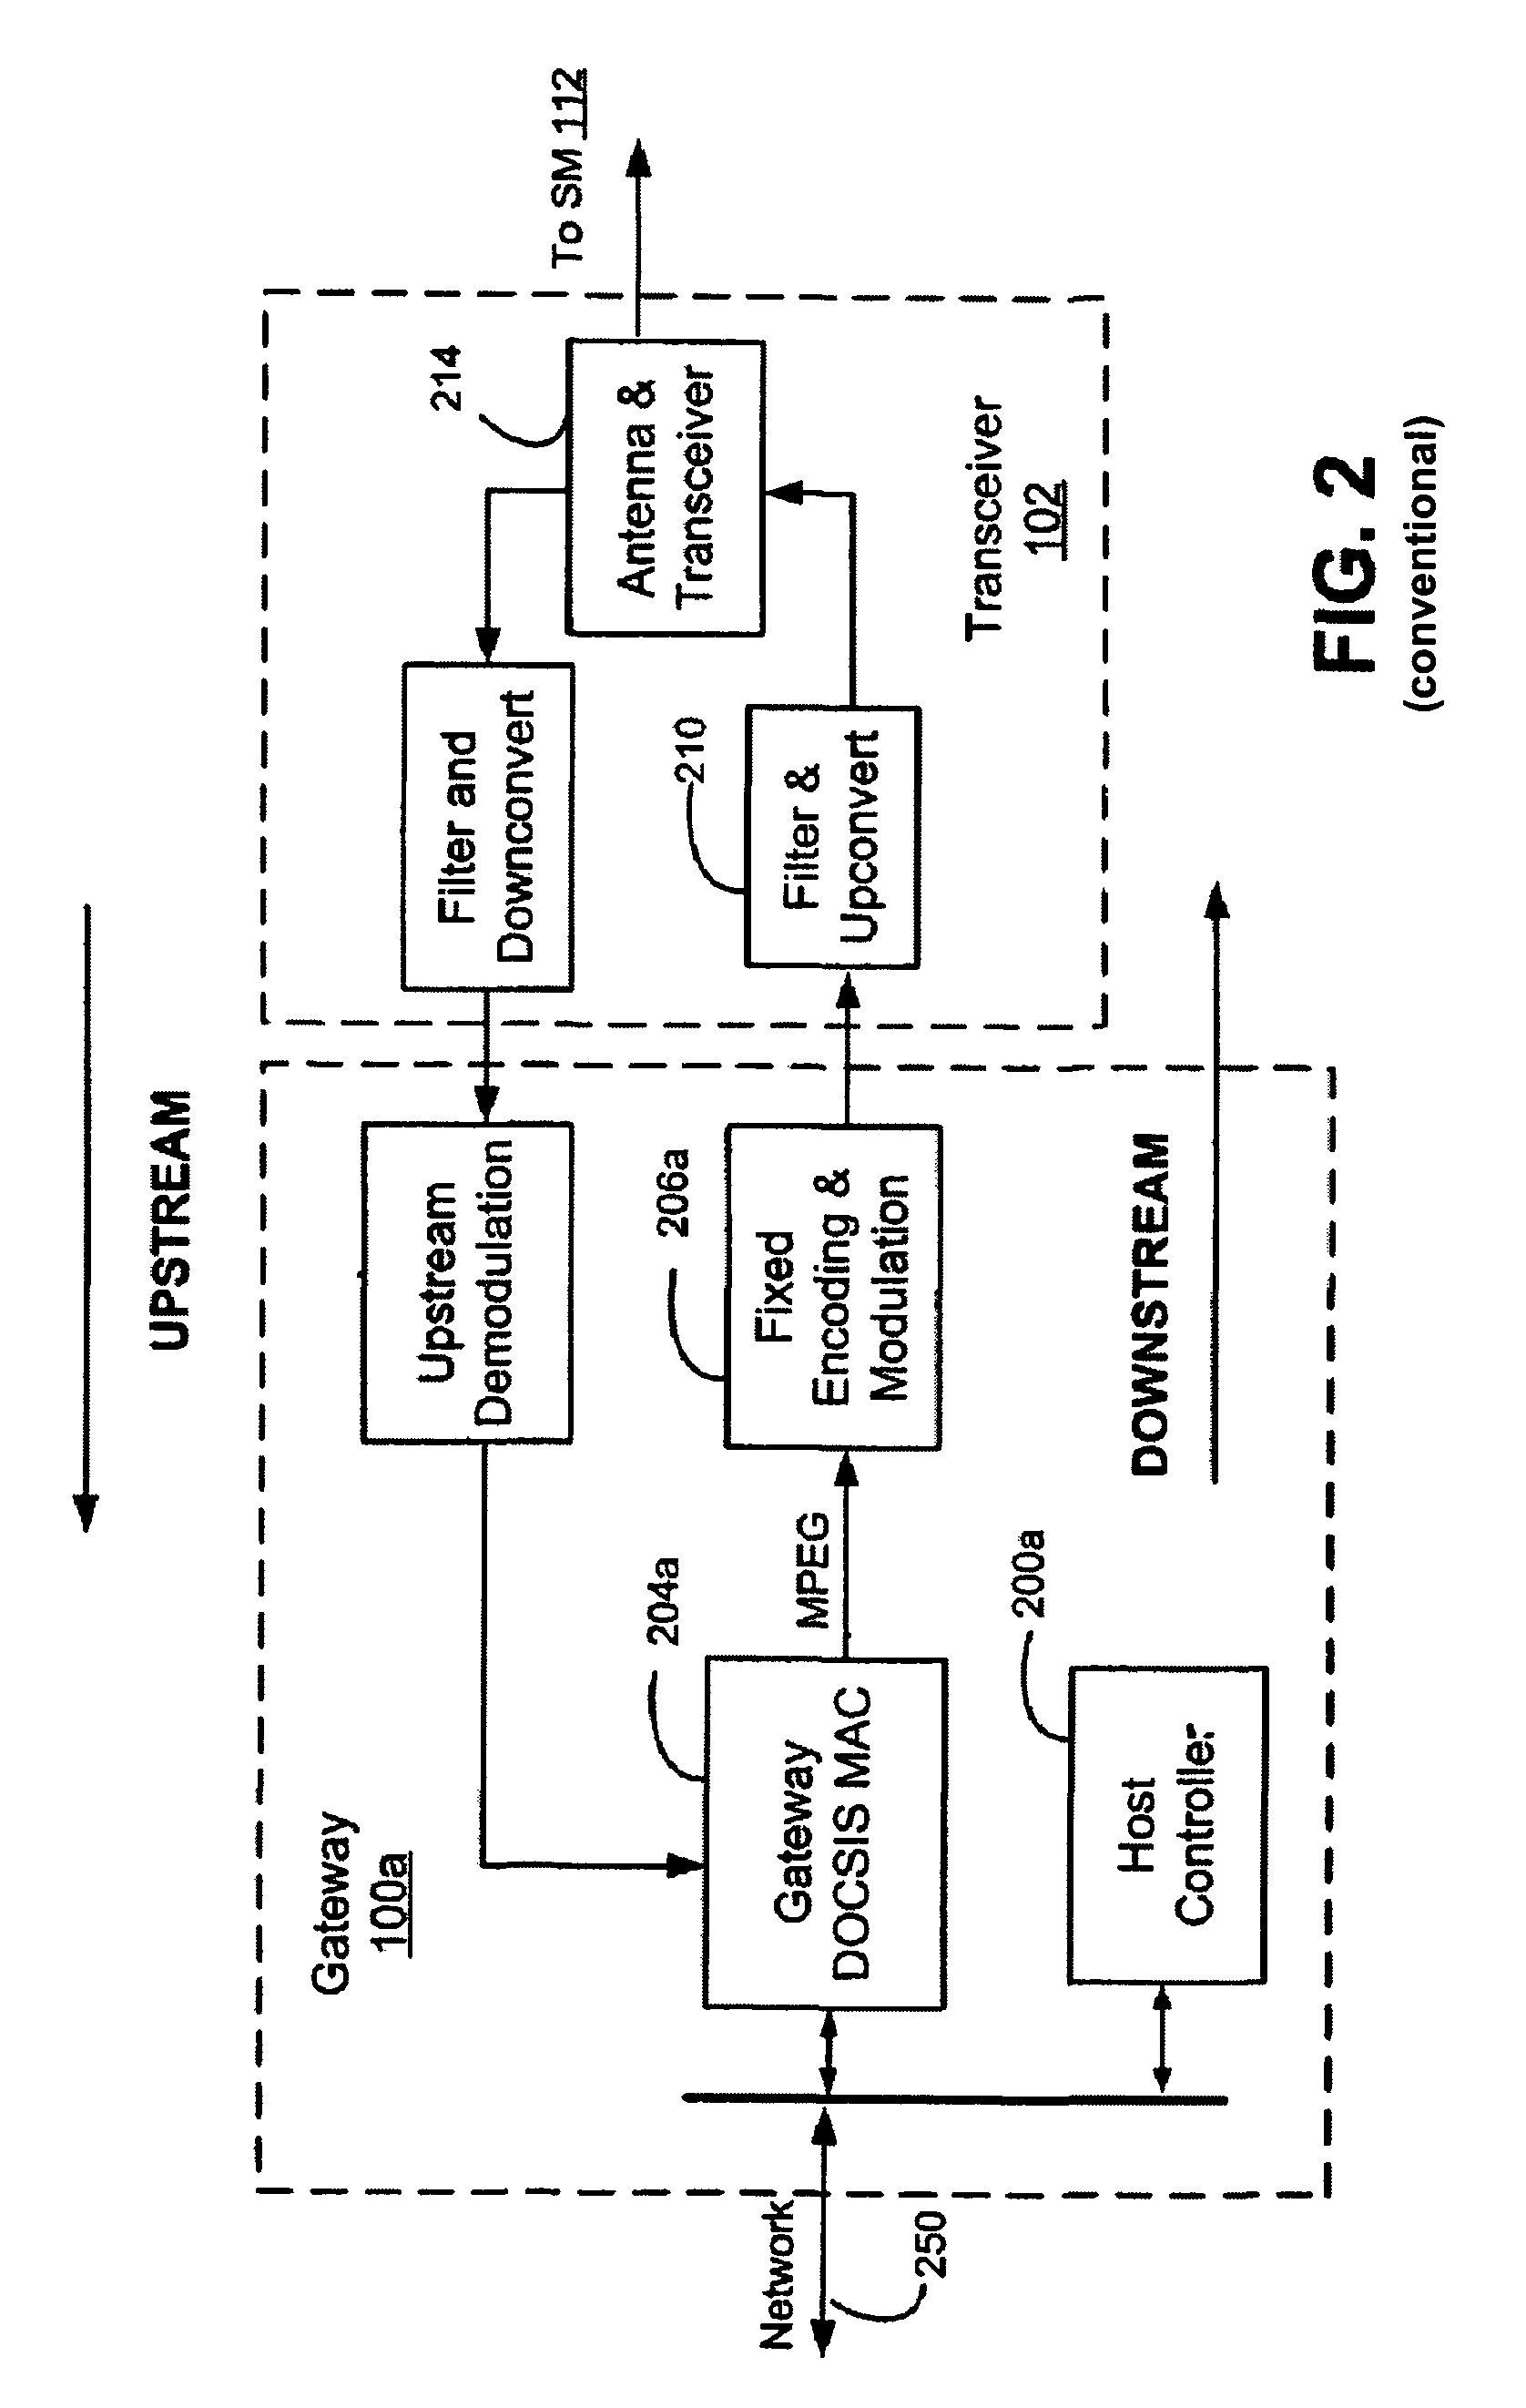 Method and system for adaptive modulation scheduling